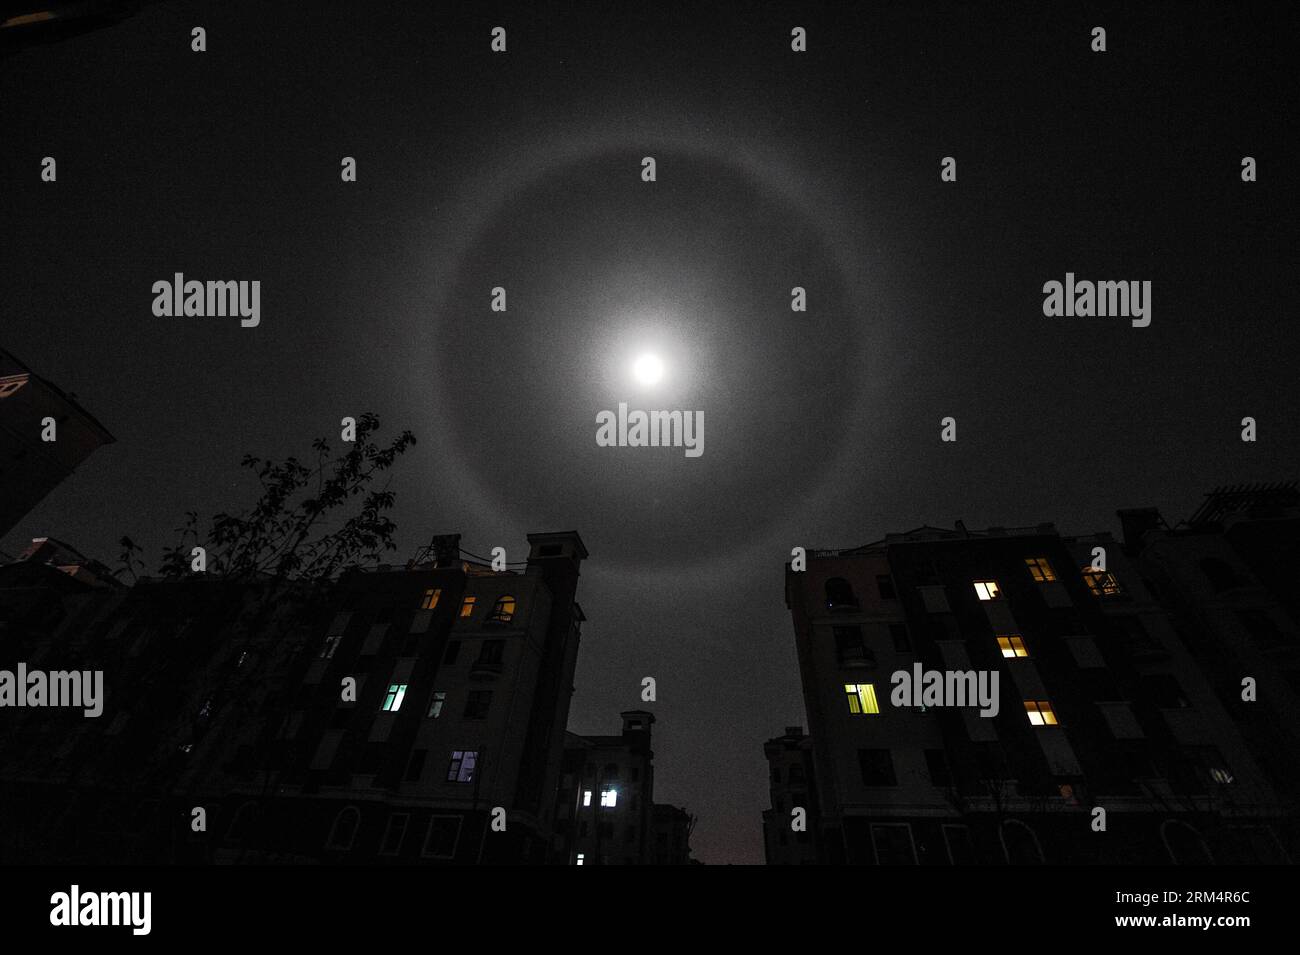 Bildnummer: 60507321  Datum: 20.09.2013  Copyright: imago/Xinhua CHANGCHUN, Sept. 20, 2013 - Photo taken on Sept. 20, 2013 shows the moon halo over the sky in Changchun City, capital of northeast China s Jilin Province. The halos are caused by both refraction (splitting of light) and reflection (glints of light) from ice crystals in the air.(Xinhua/Xu Chang) (cjq) CHINA-CHANGCHUN-MOON HALO (CN) PUBLICATIONxNOTxINxCHN Gesellschaft Lichteffekt Mond Halo xdp x0x 2013 quer premiumd     60507321 Date 20 09 2013 Copyright Imago XINHUA Changchun Sept 20 2013 Photo Taken ON Sept 20 2013 Shows The Moon Stock Photo